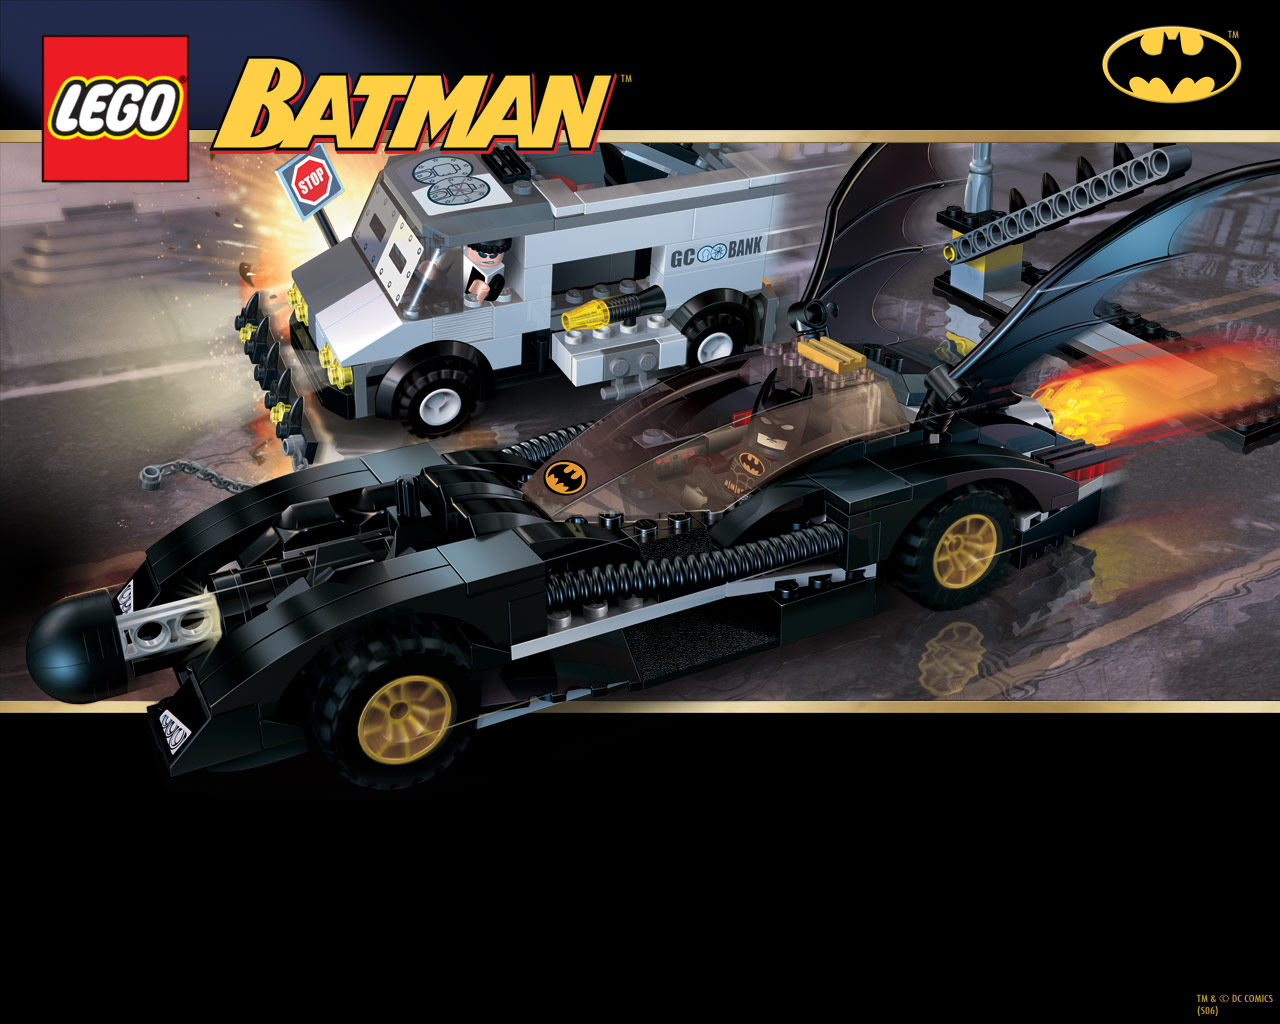 products, lego, batmobile lock screen backgrounds